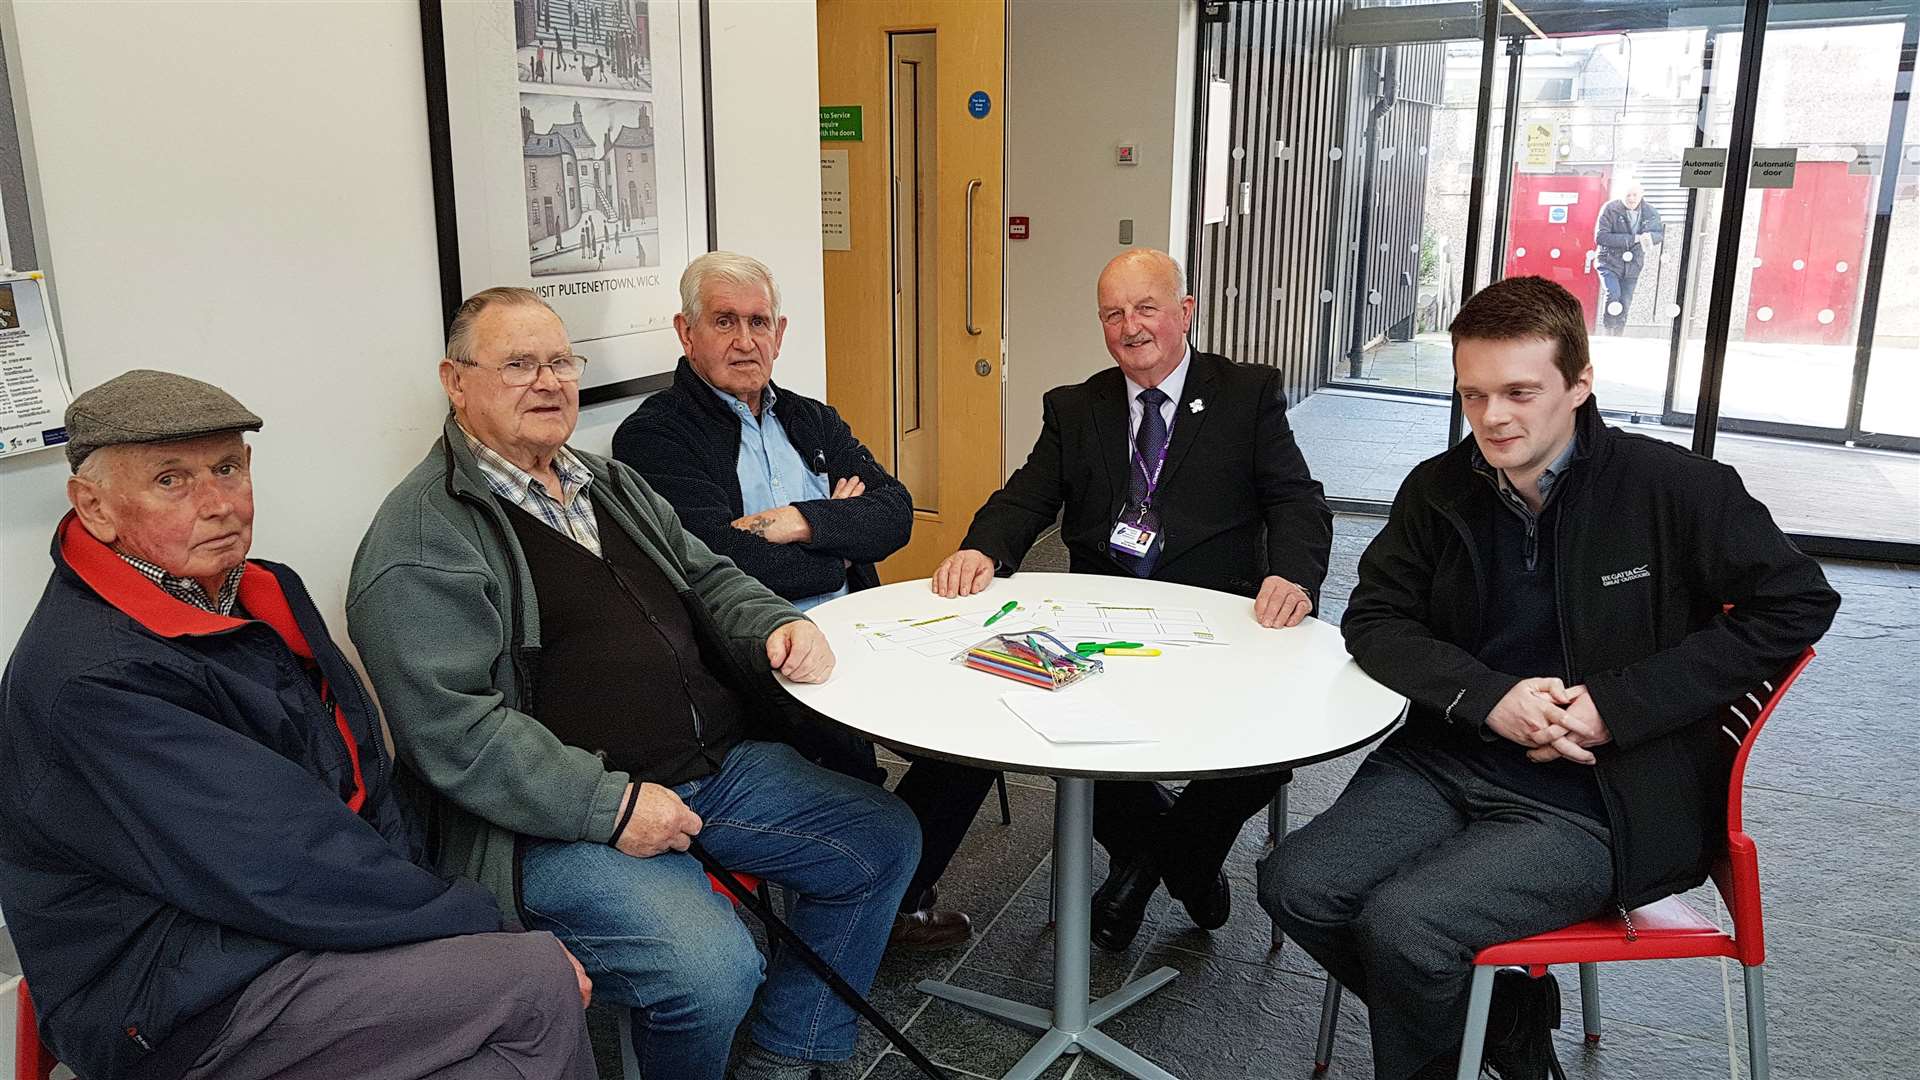 Councillors Andrew Sinclair (right) and Willie Mackay (second from right) with members of the public at the street design session in Caithness House on Thursday afternoon.